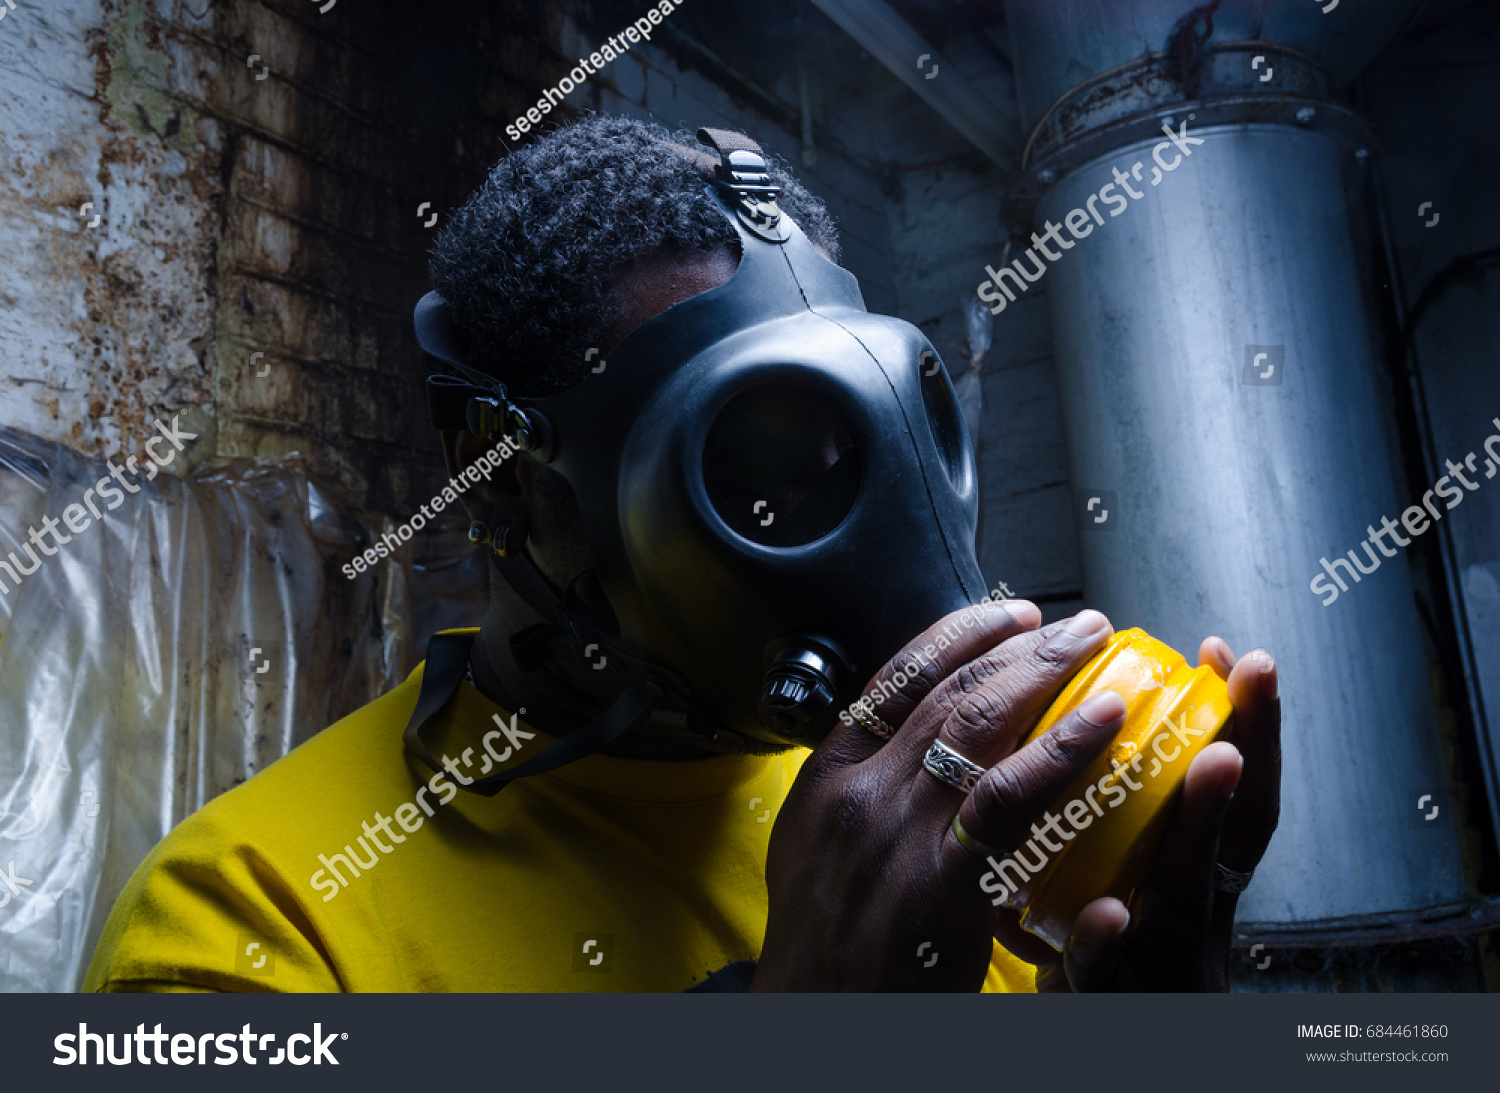 A scary man with reflection eyes in an industrial setting wearing a horror gas mask staring and intimidating. A horror movie character. #684461860